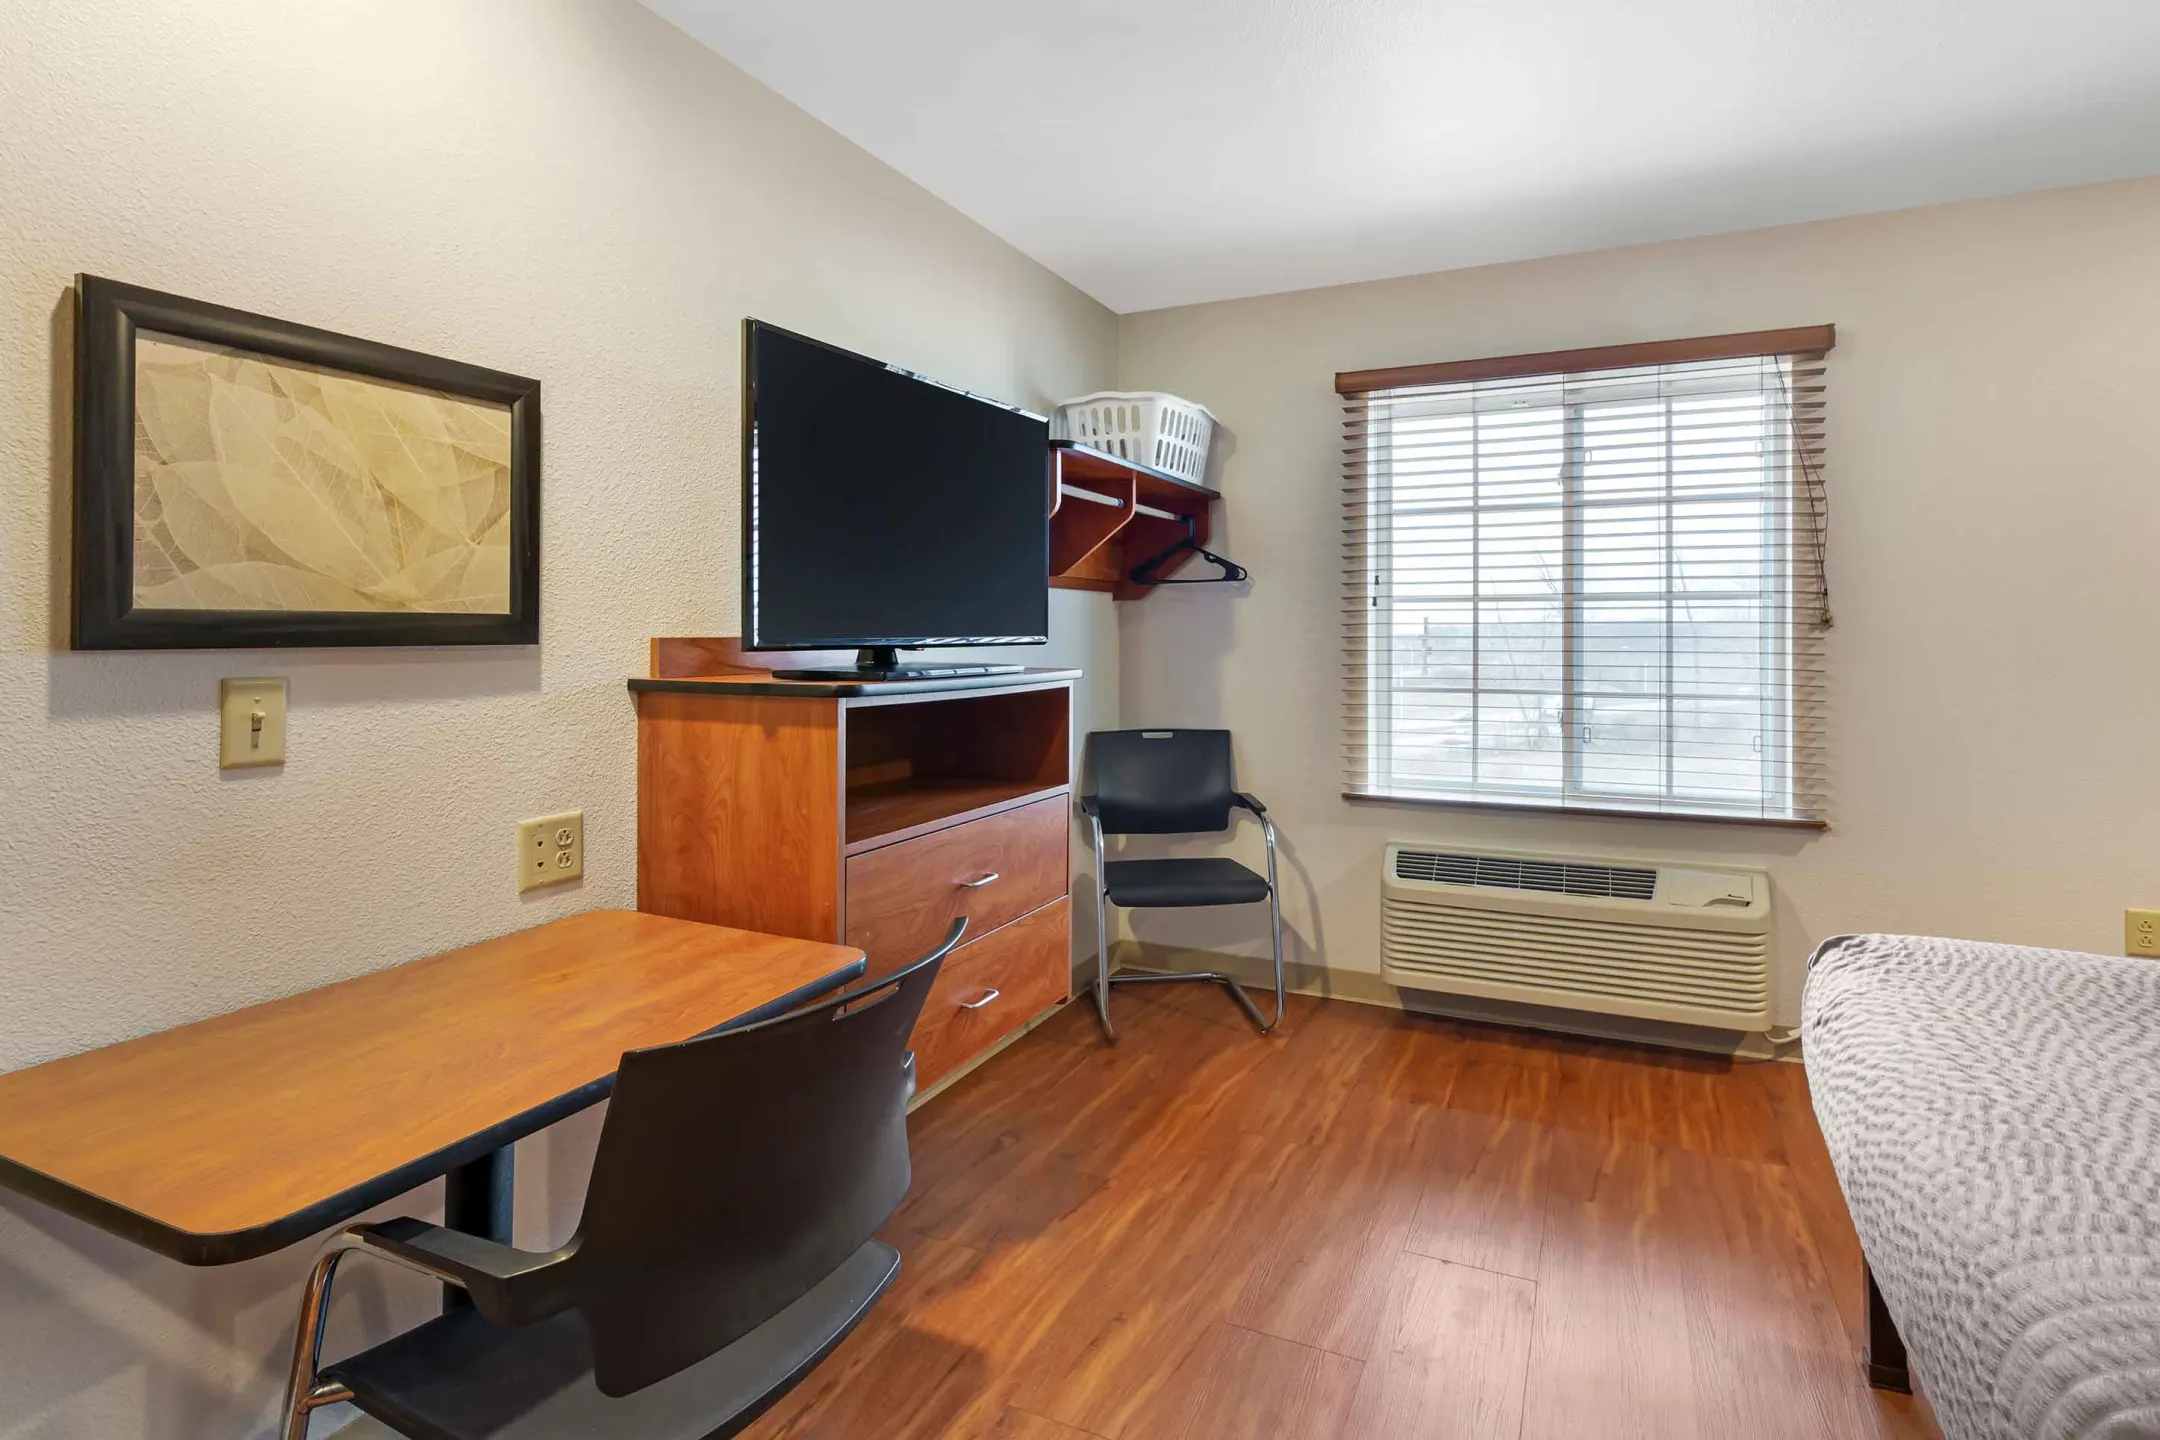 Living Room - Furnished Studio - Cleveland - Airport - Cleveland, OH